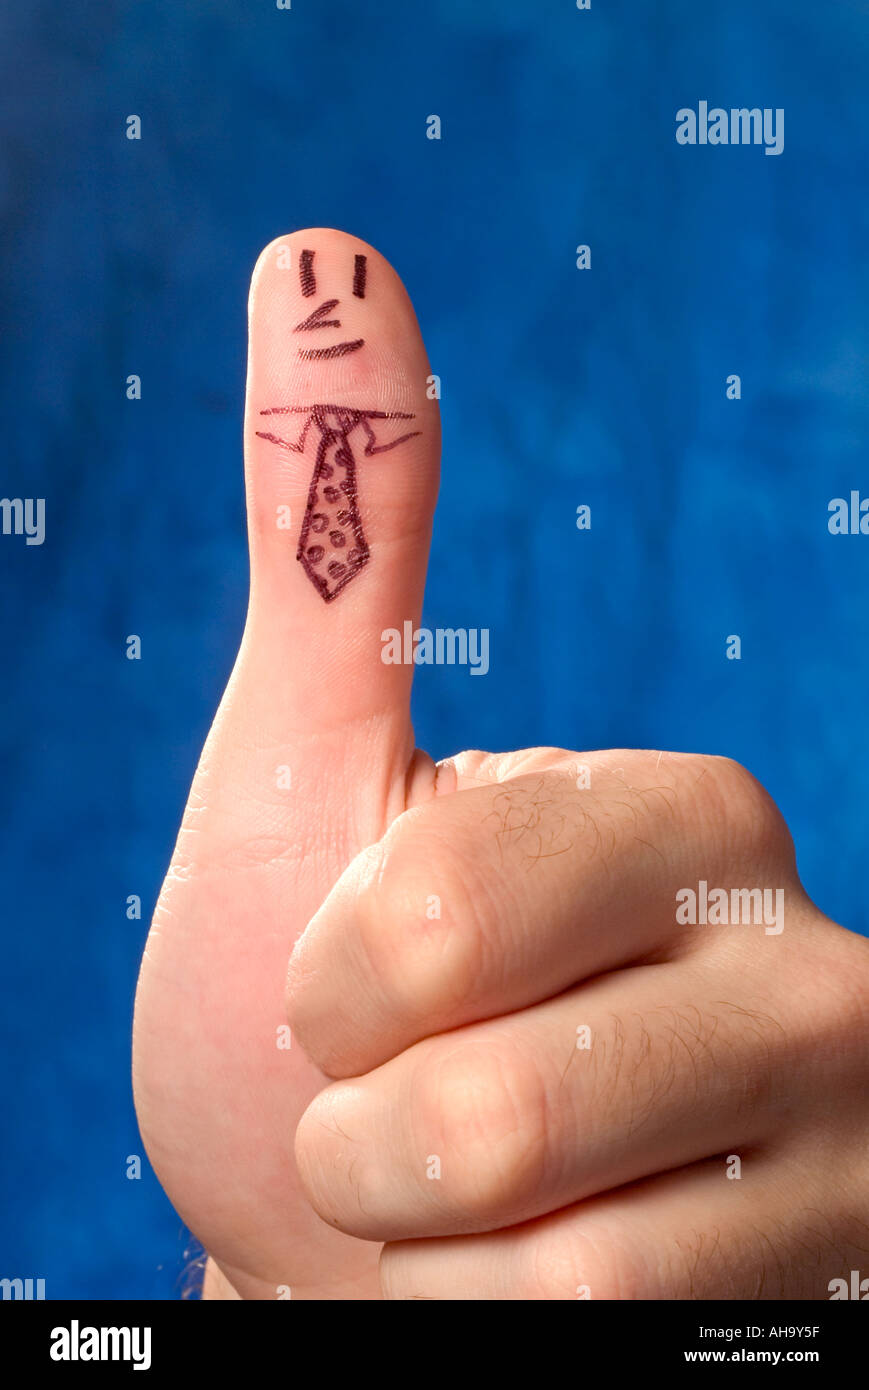 thumb with face Stock Photo - Alamy